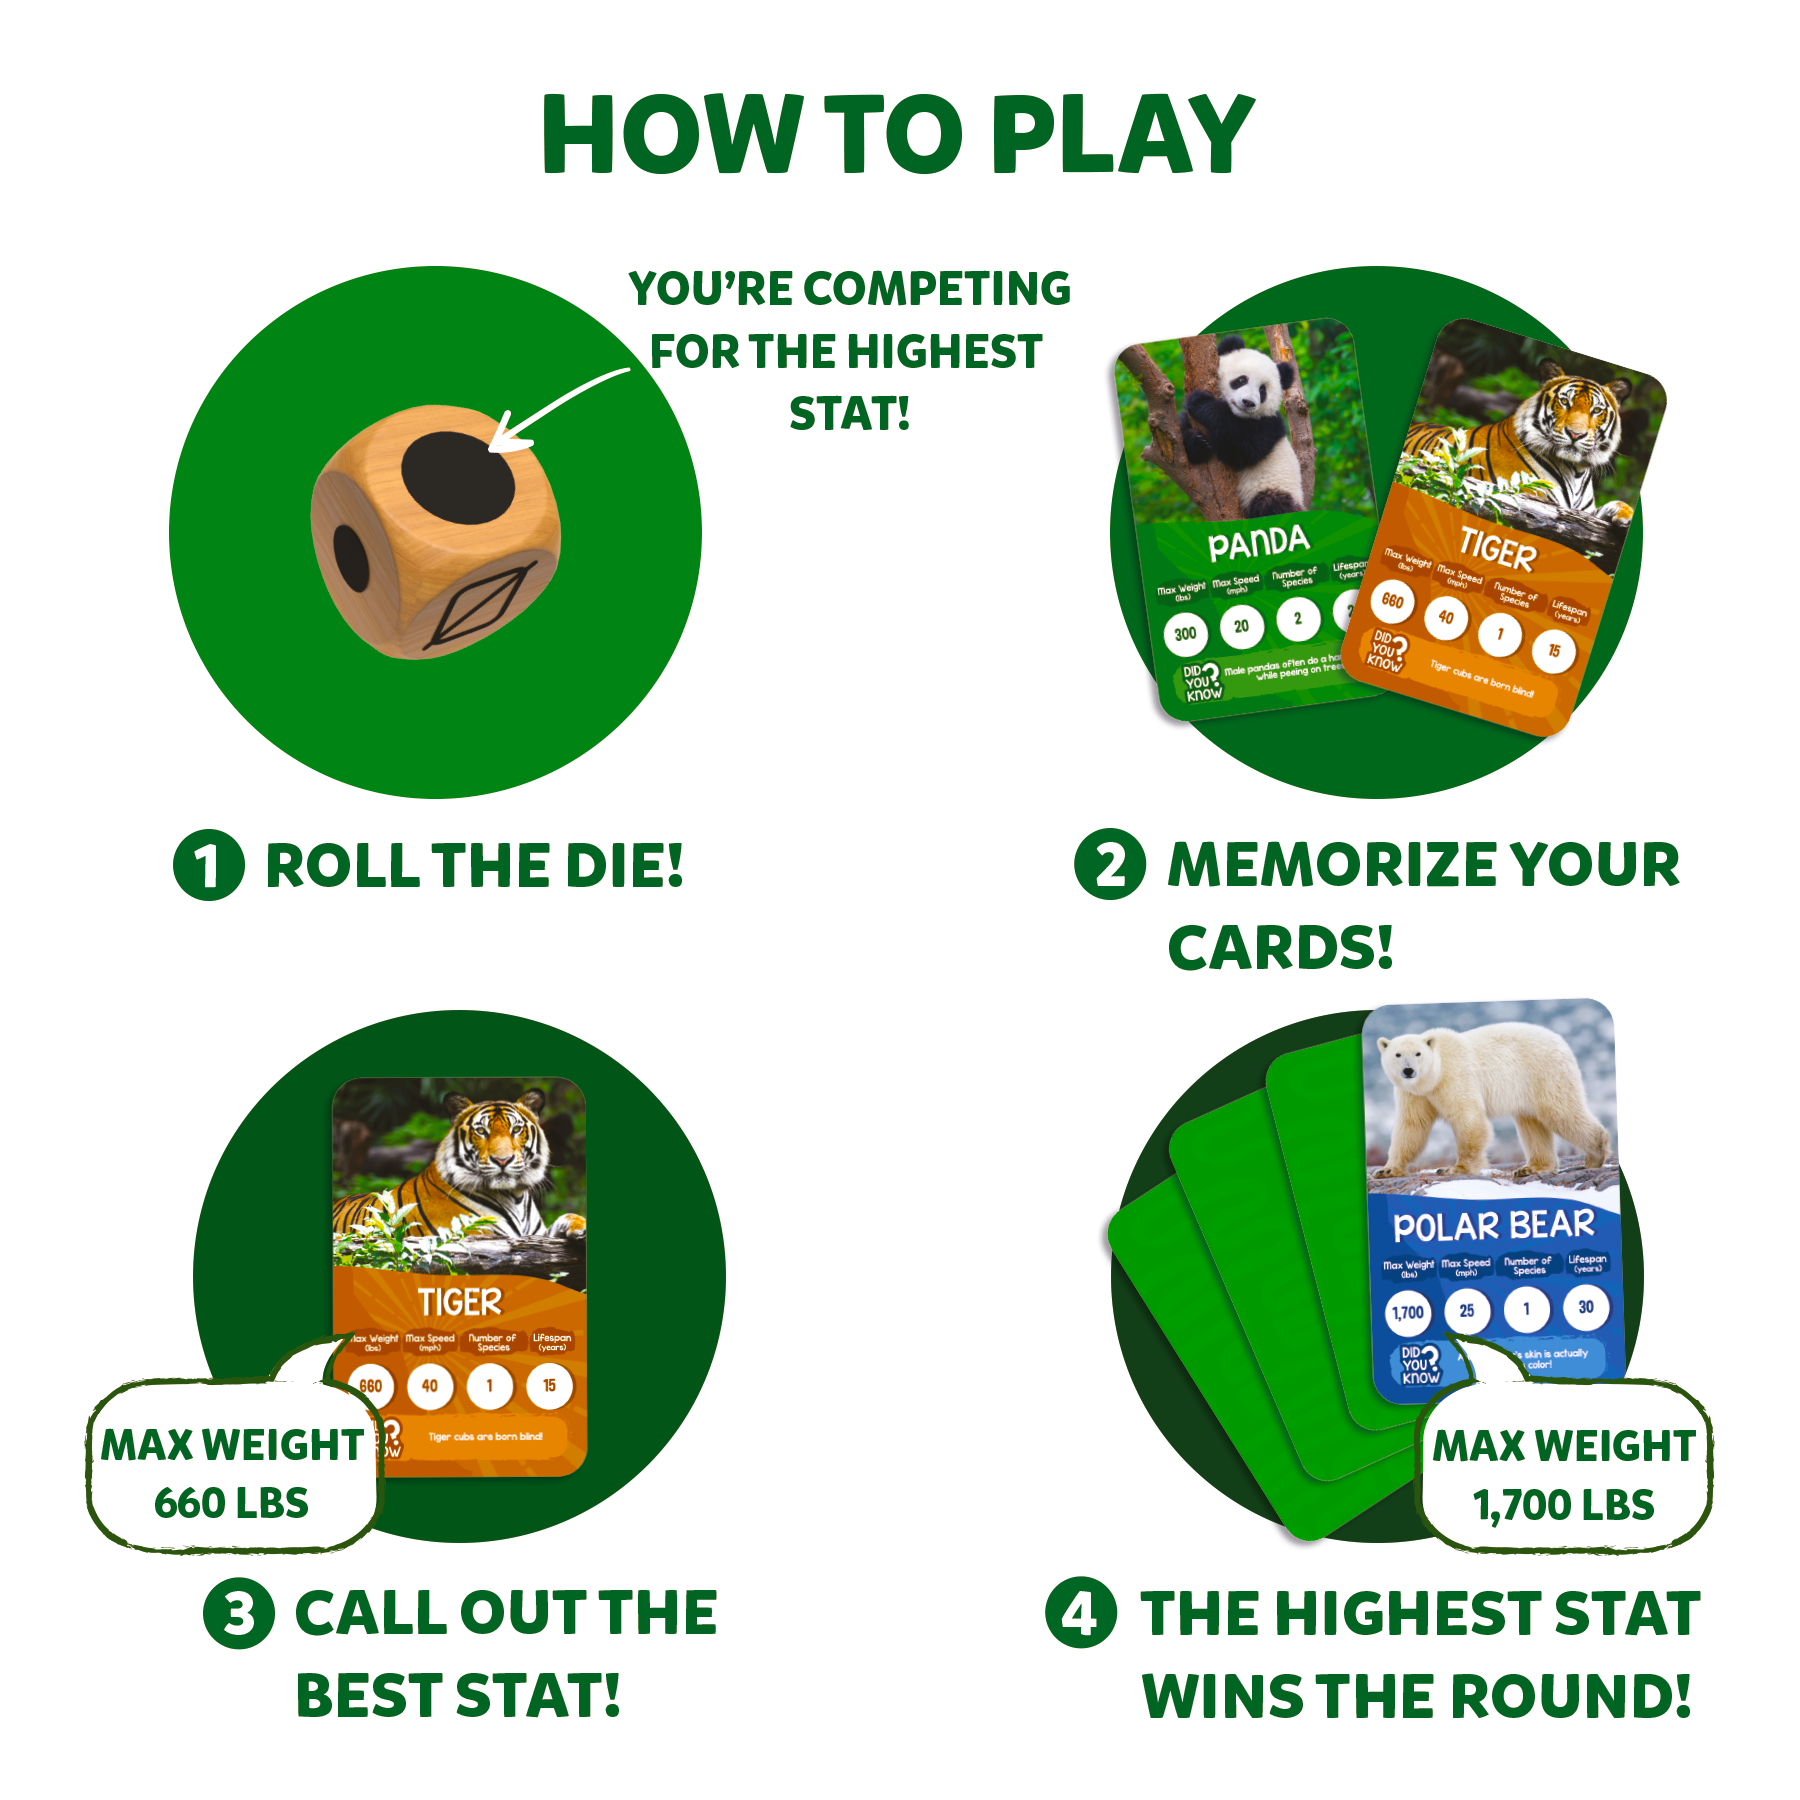 Skillmatics Trump Card Game - Rank Up Animals, Fun & Fast-Paced Game Of Memory, Perfect For Family Game Night, Gifts For Ages 7 And Up